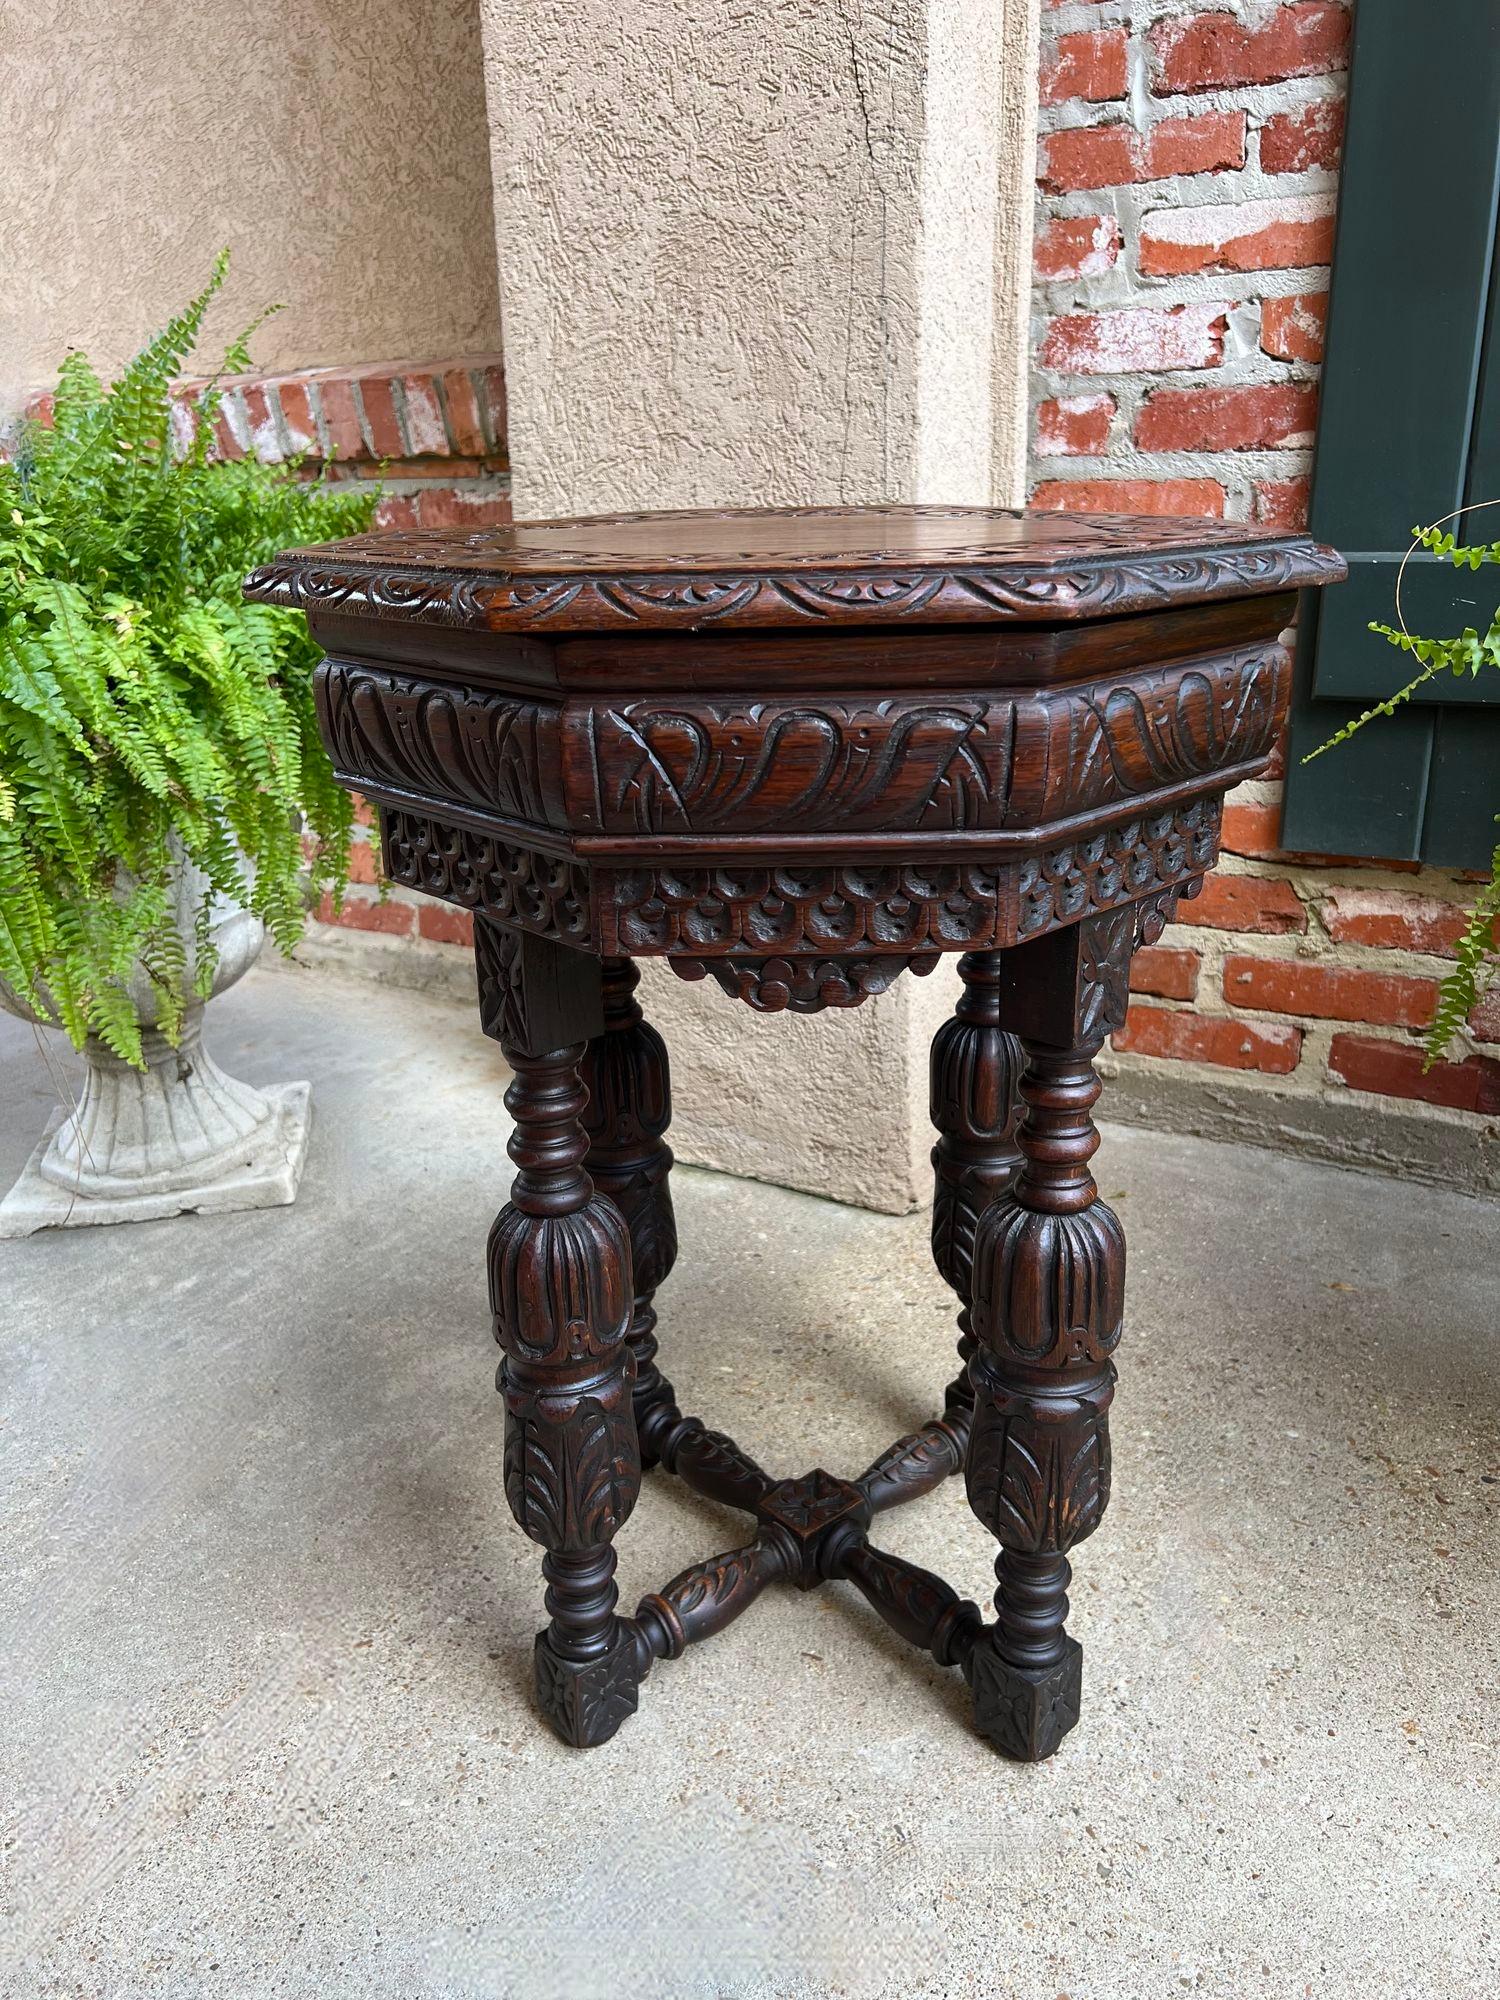 PETITE Antique French Octagon Center Side TABLE Side End Renaissance Carved Oak.

Direct from France, this SUPER PETITE size octagon table, ornately adorned, just like the full-size version, with an impressive silhouette and design.
The solid oak